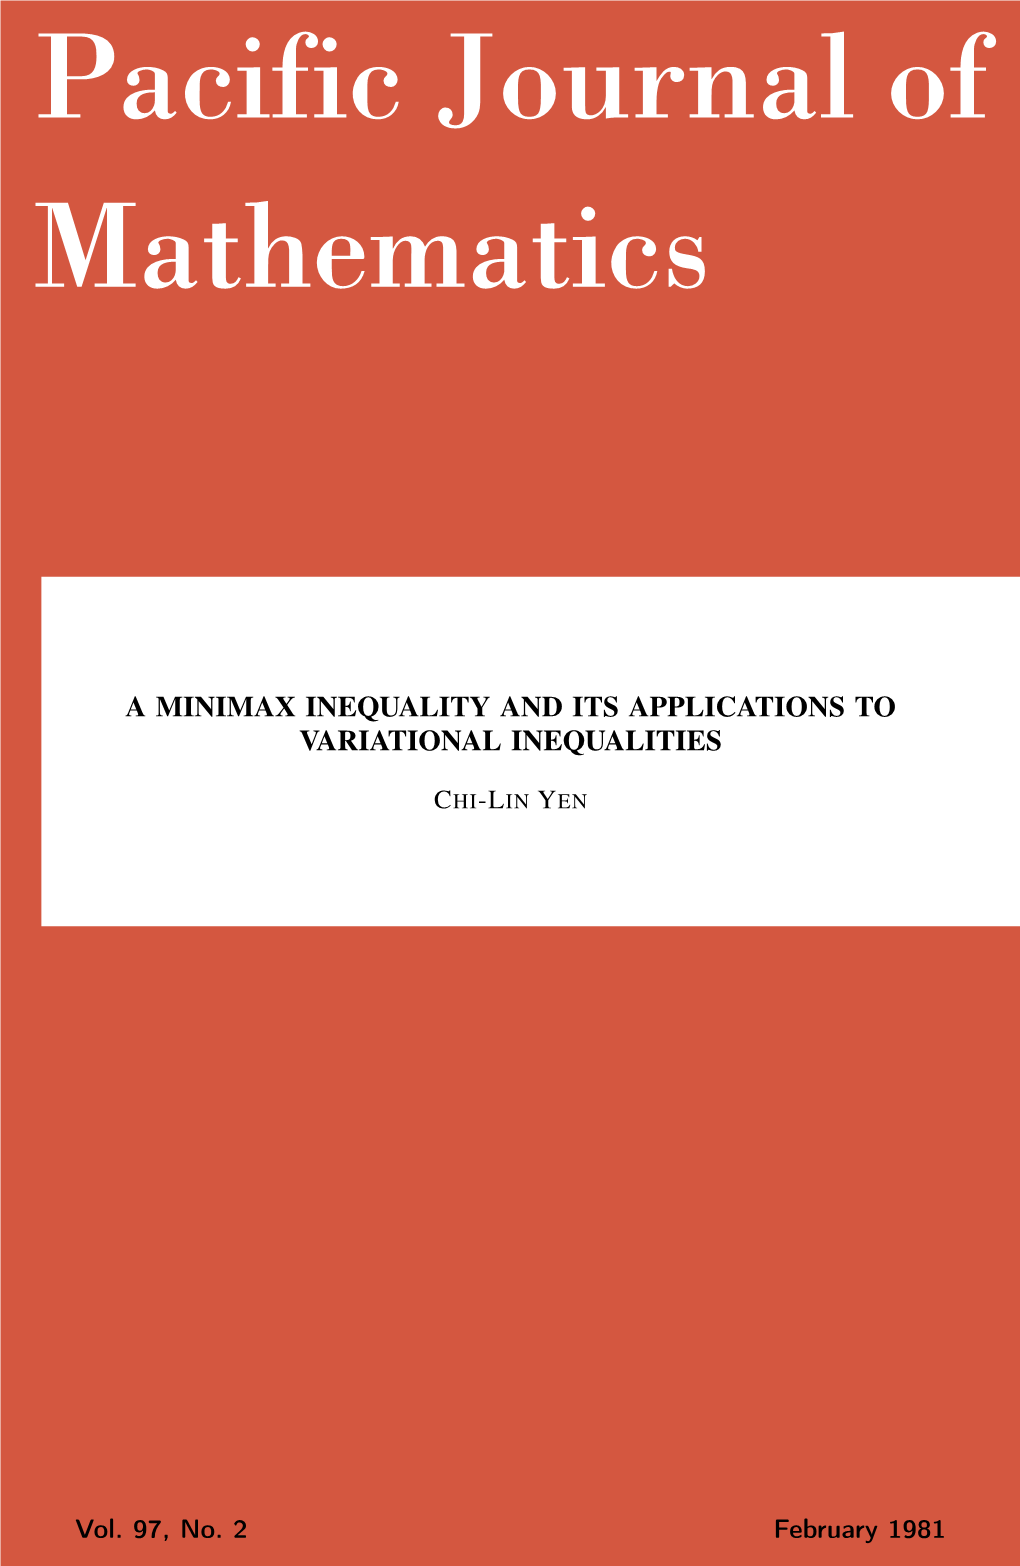 A Minimax Inequality and Its Applications to Variational Inequalities